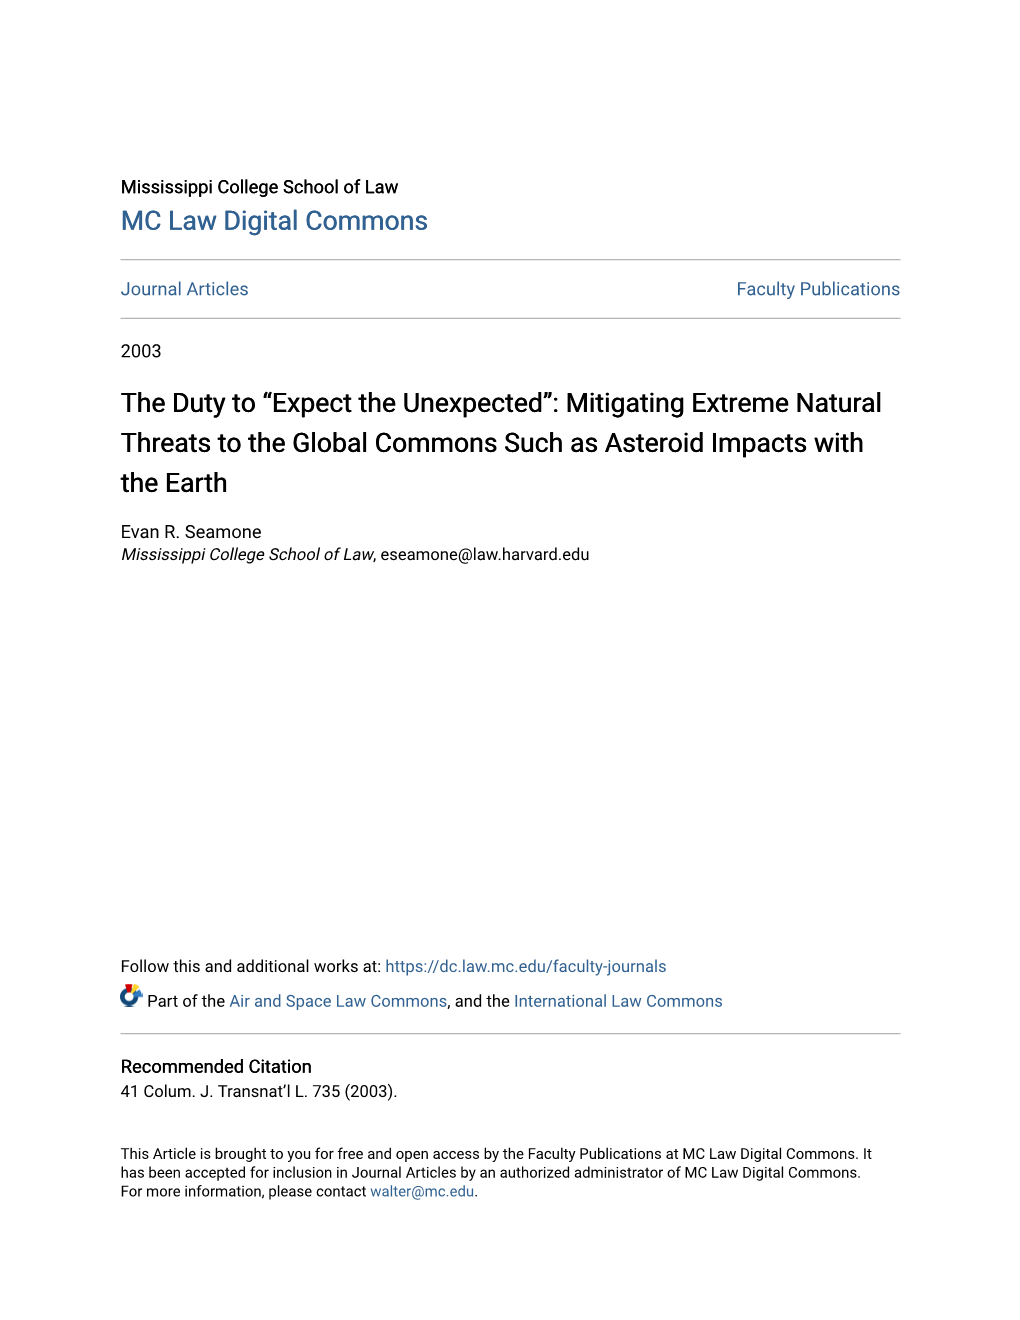 “Expect the Unexpected”: Mitigating Extreme Natural Threats to the Global Commons Such As Asteroid Impacts with the Earth